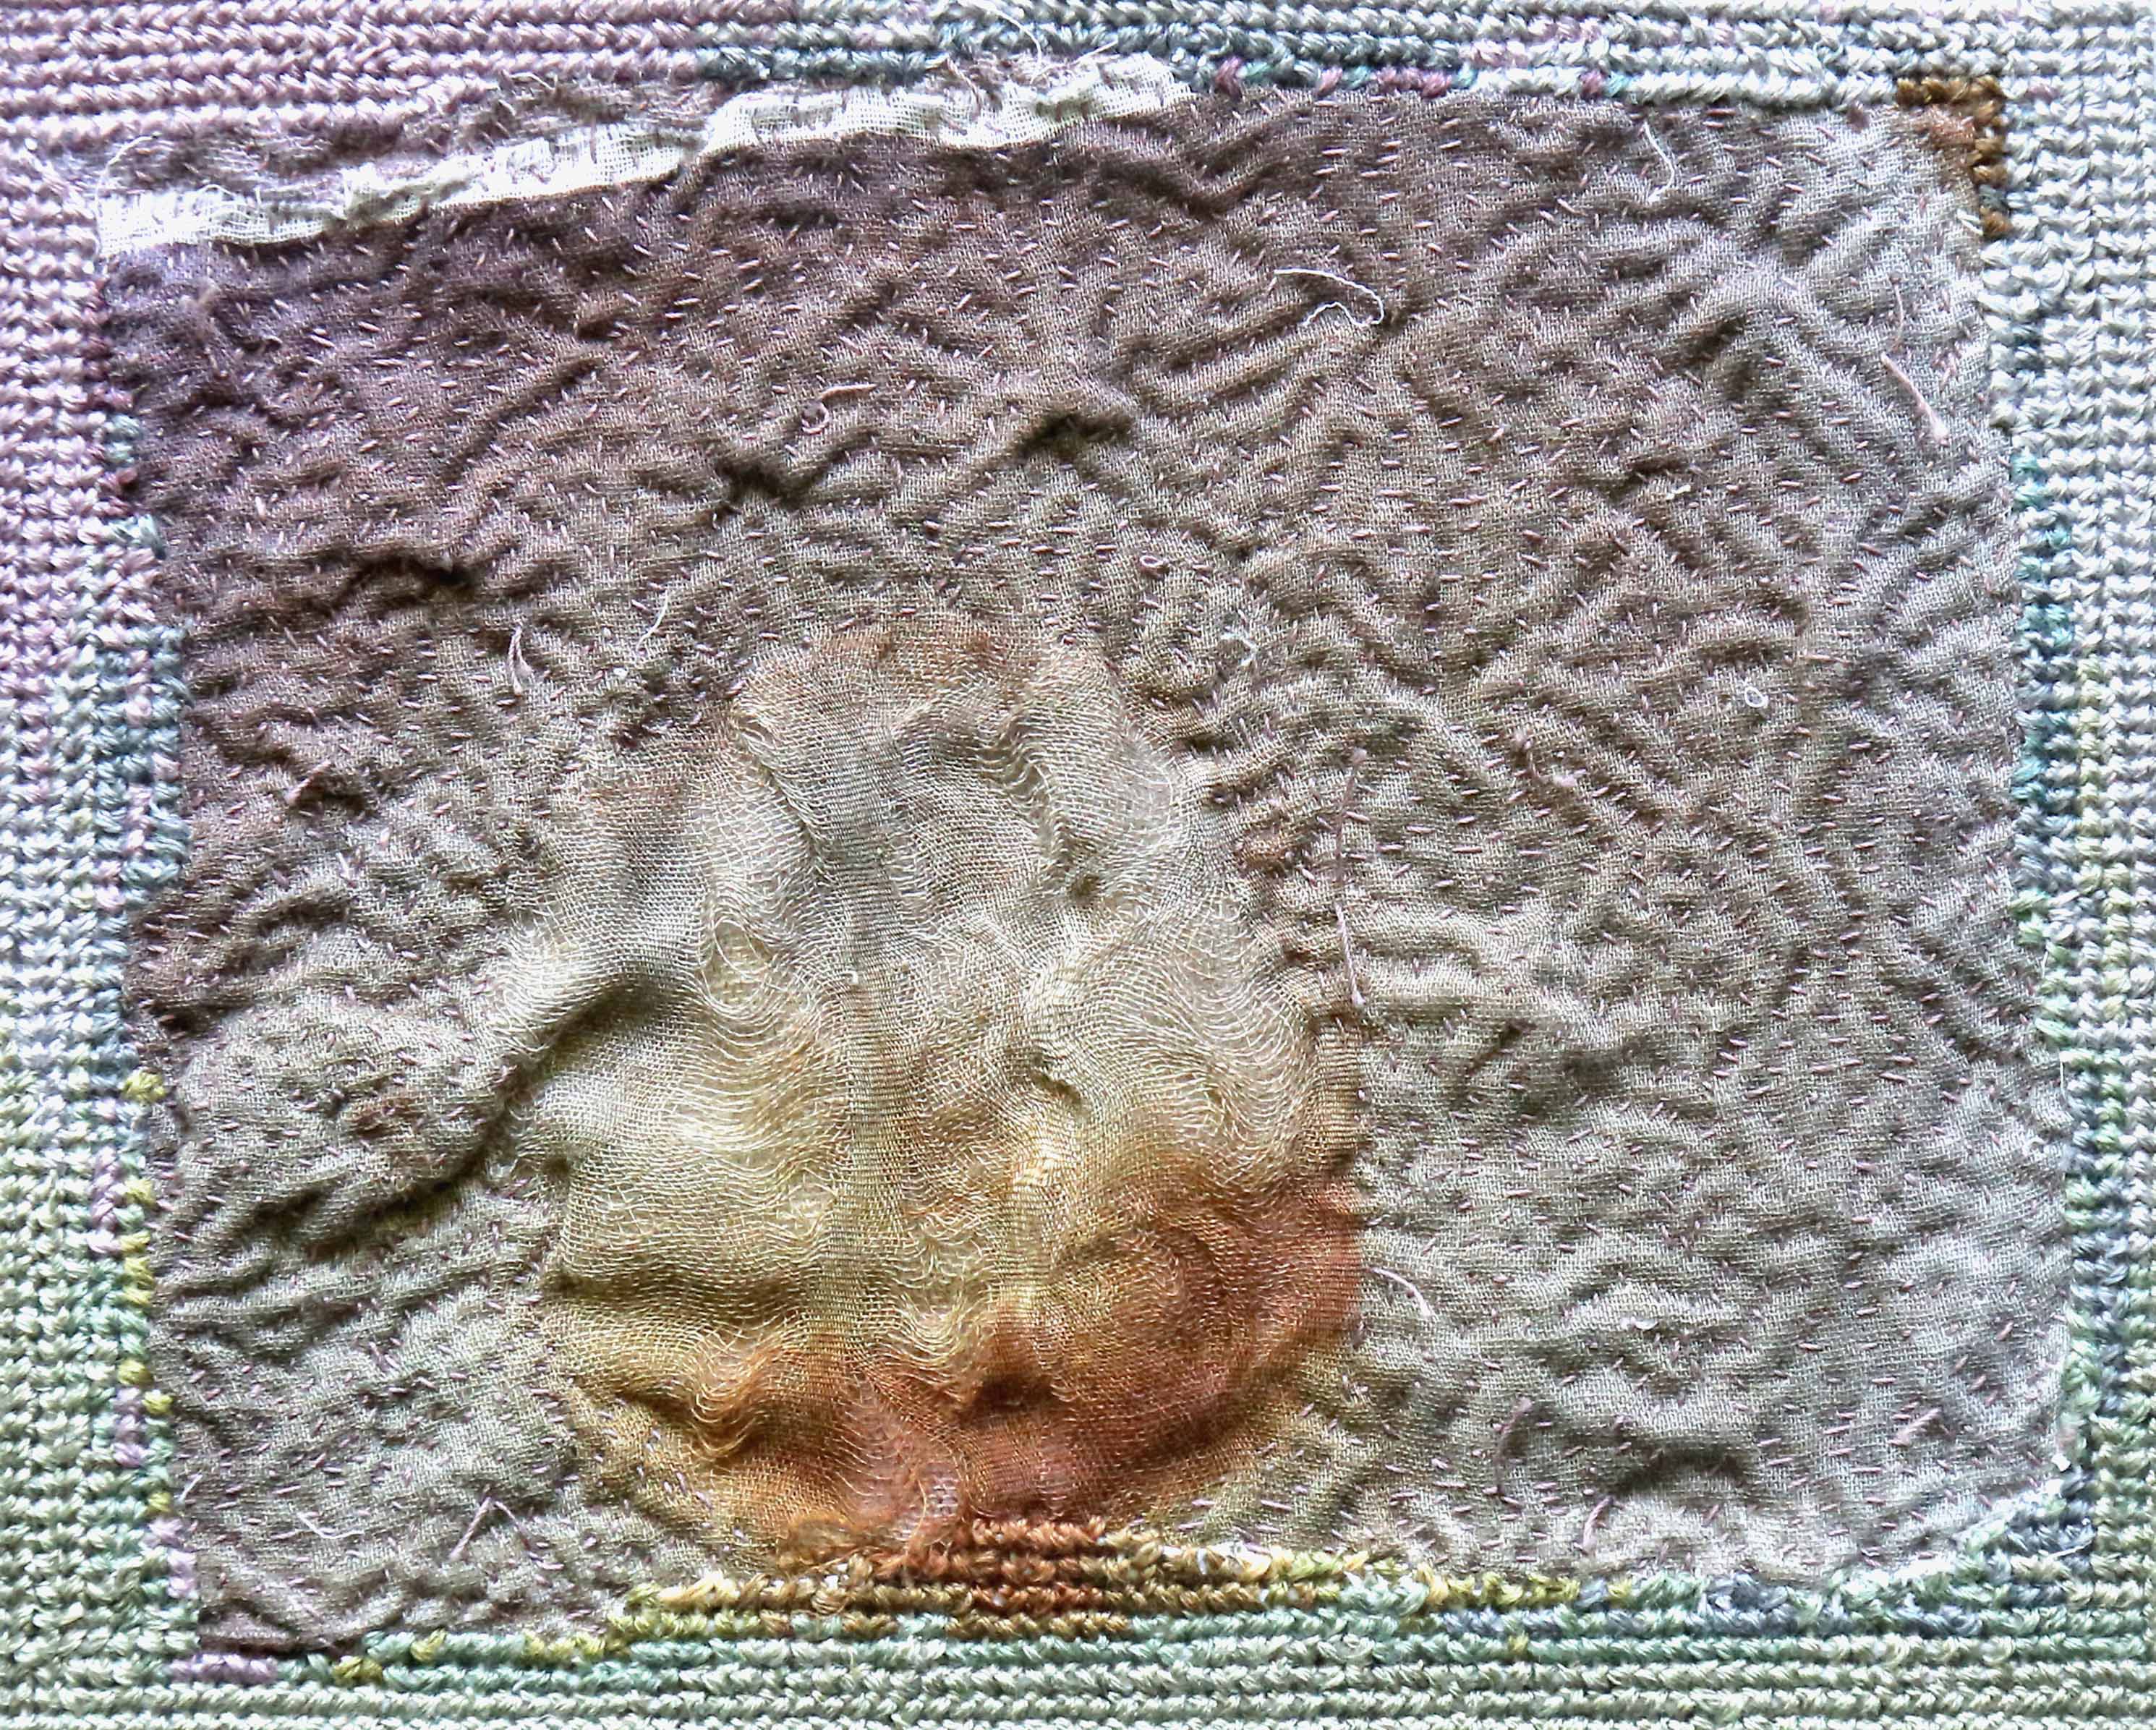 Just Looking II, 2012 [set of four] [5 x 6.5 inches - unframed] Materials: cotton voile, cotton floss, cotton-polyester thread Technique: photography, digital printing, tearing, layering,stitching, embroidery